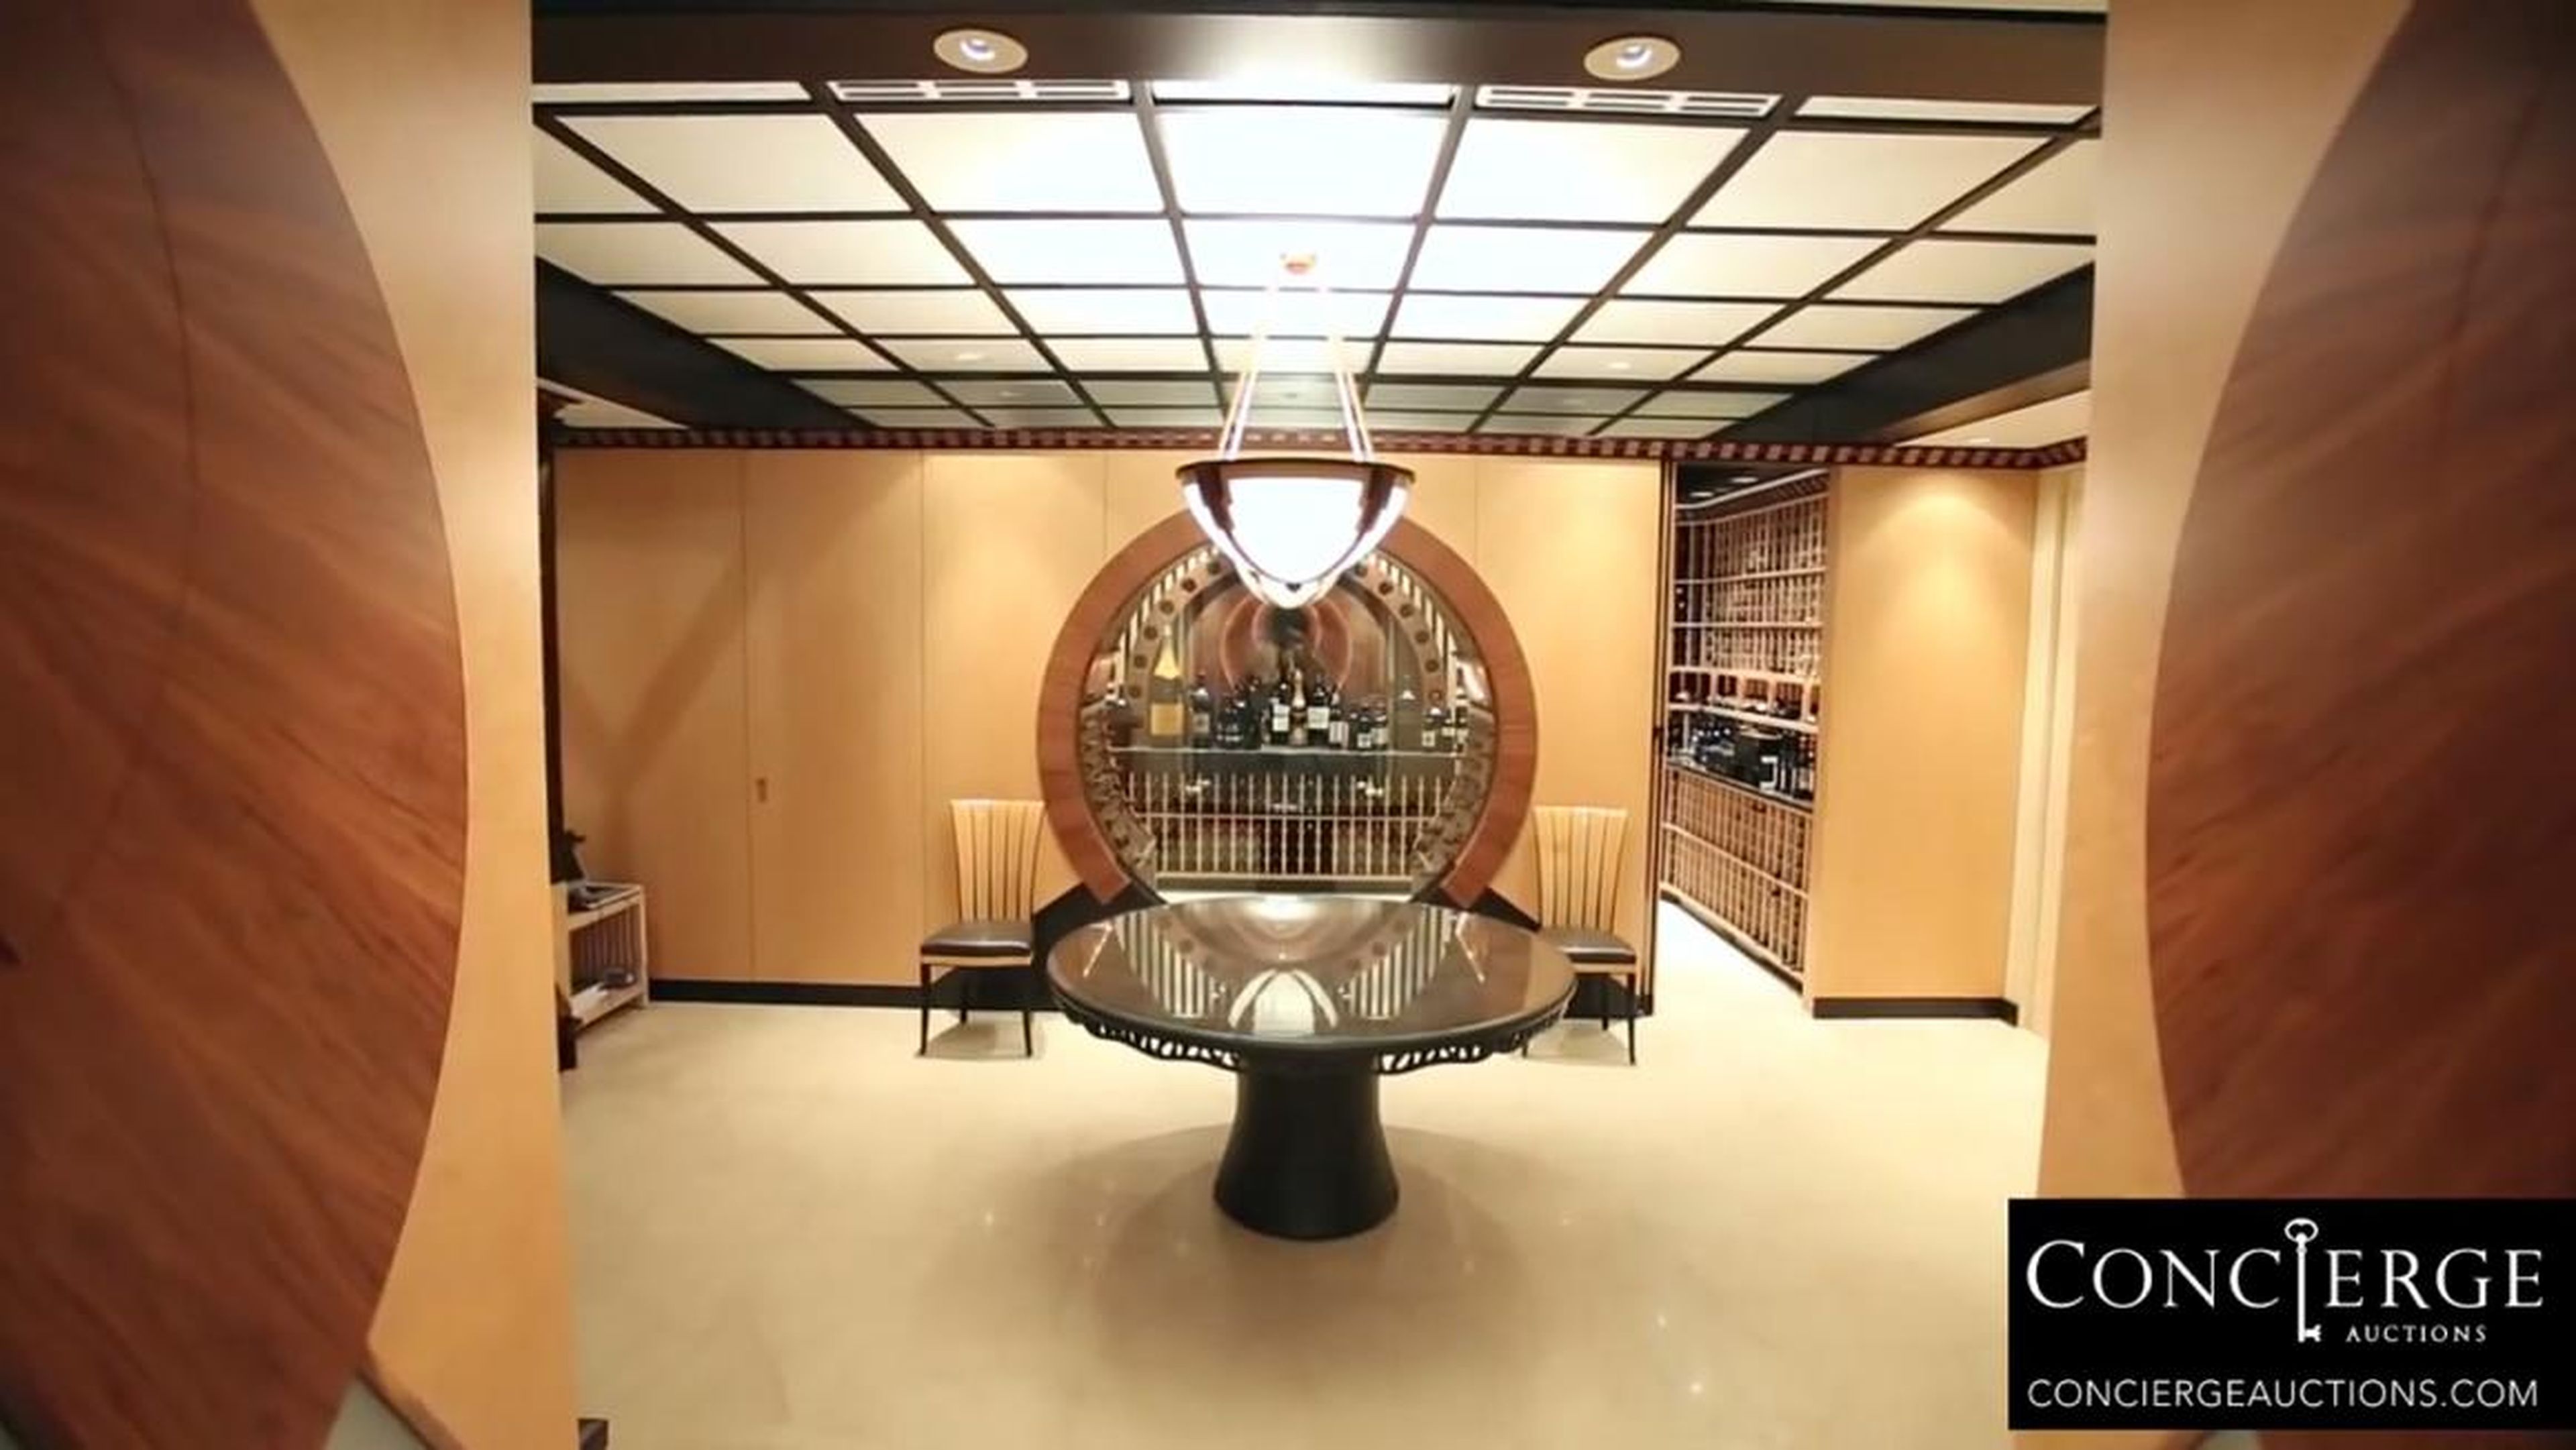 Another luxurious part of Jordan's estate is the expansive wine cellar.